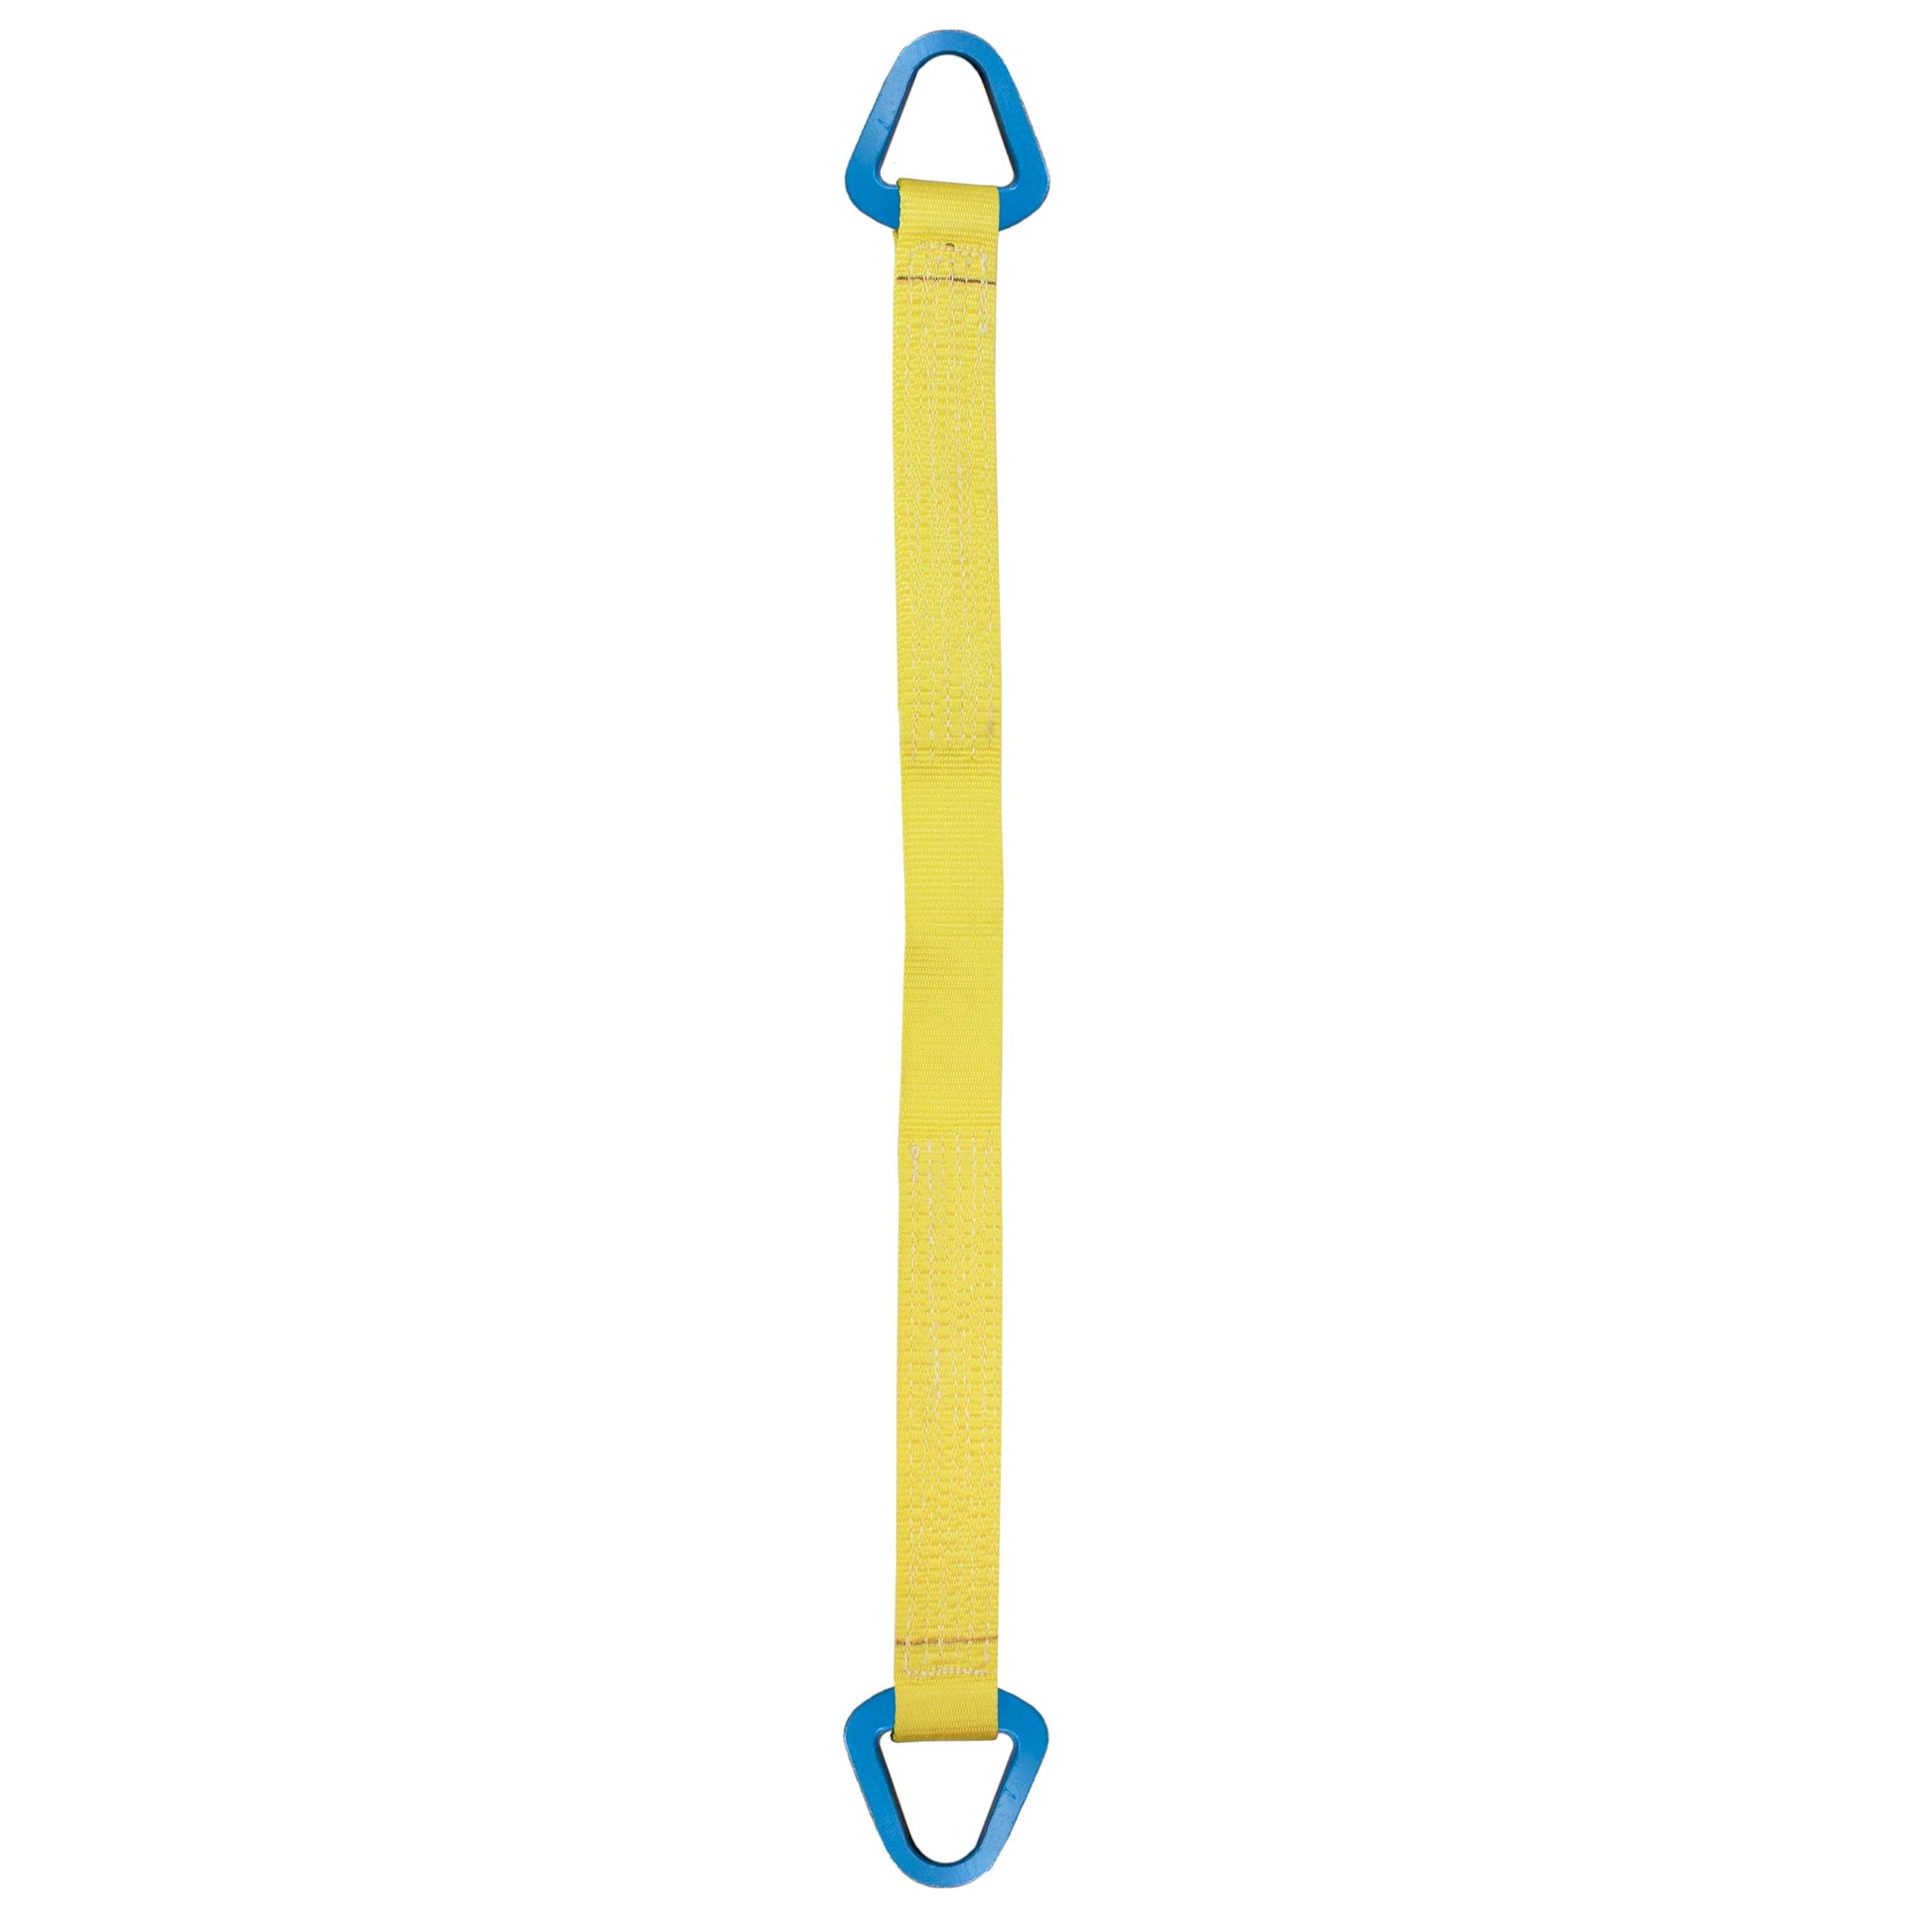 Nylon Lifting Sling Triangle 12 inch x 10 foot 2ply image 1 of 2